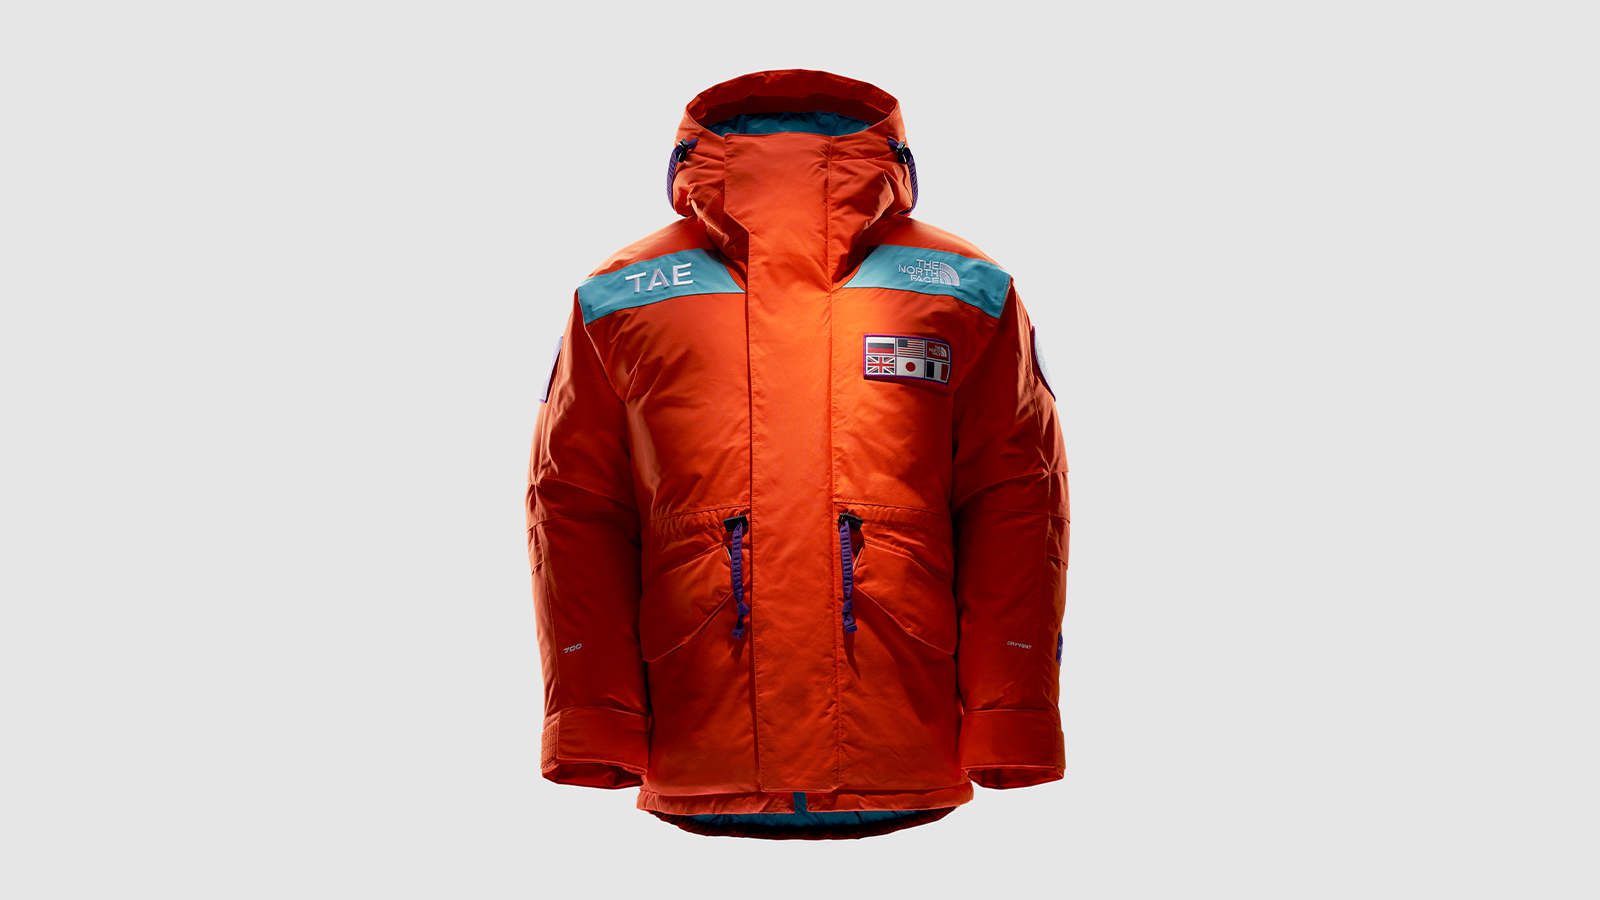 The North Face Delivers The Ultimate Winter Jacket With The Trans 